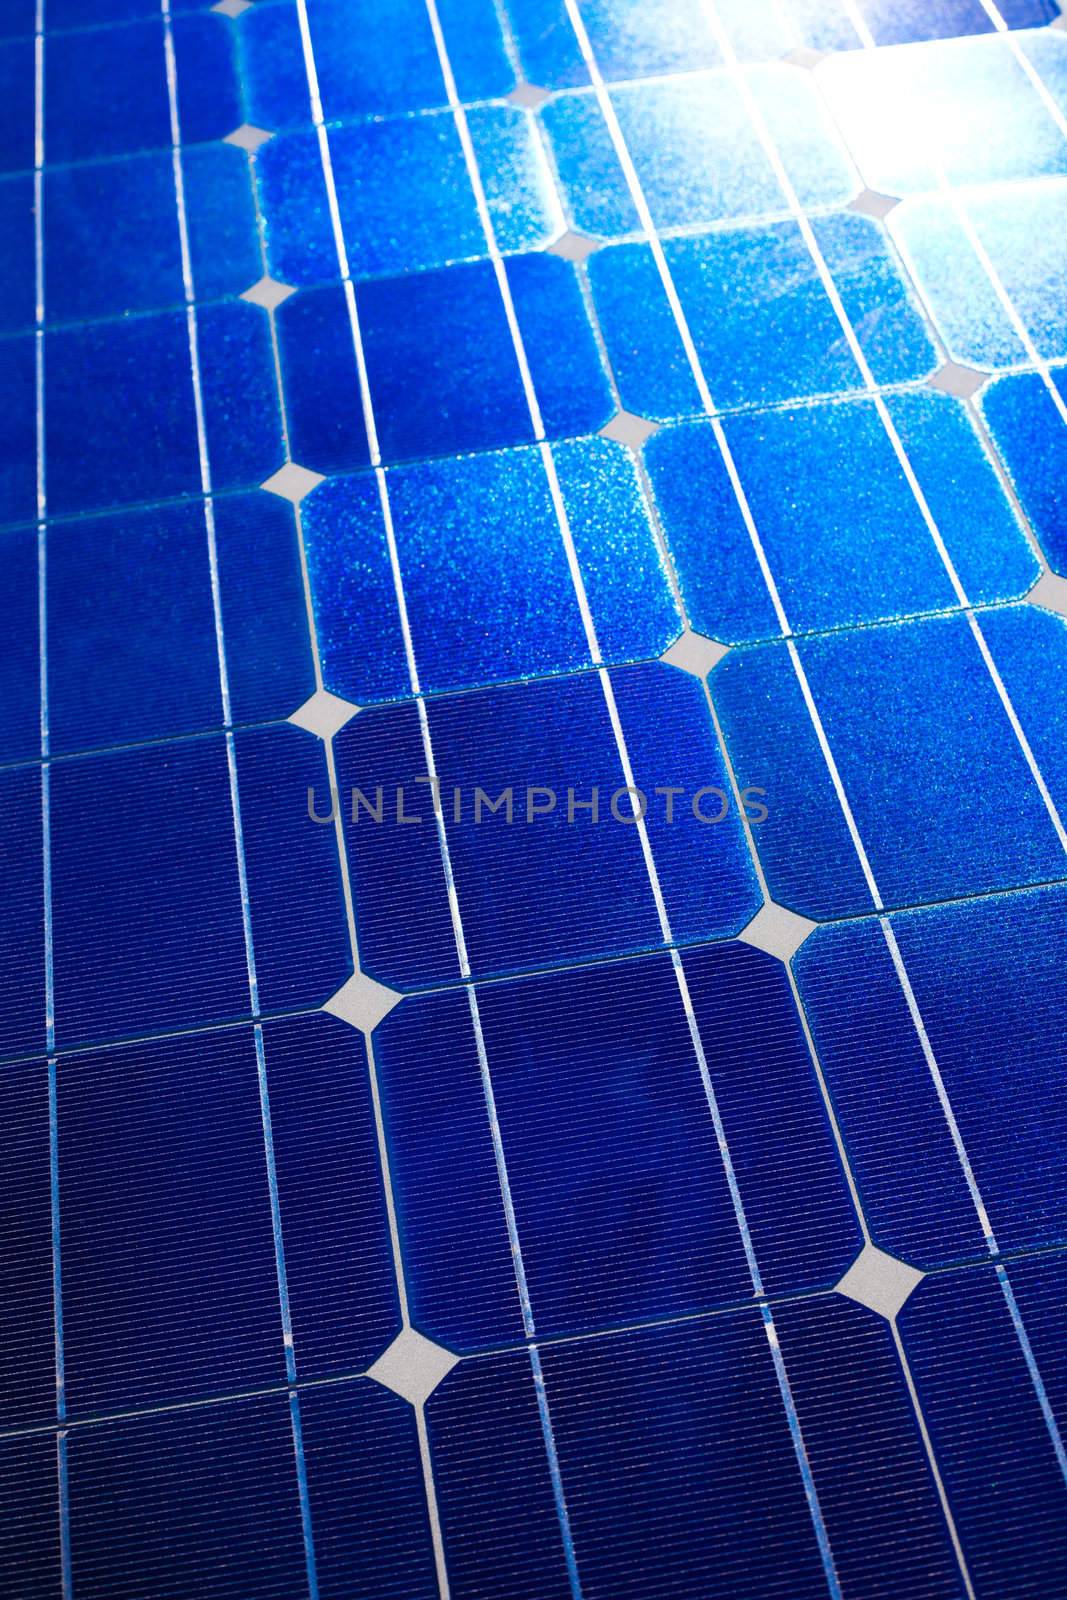 Pattern of solar cell wafers in photovoltaic solar panel with sun glare.